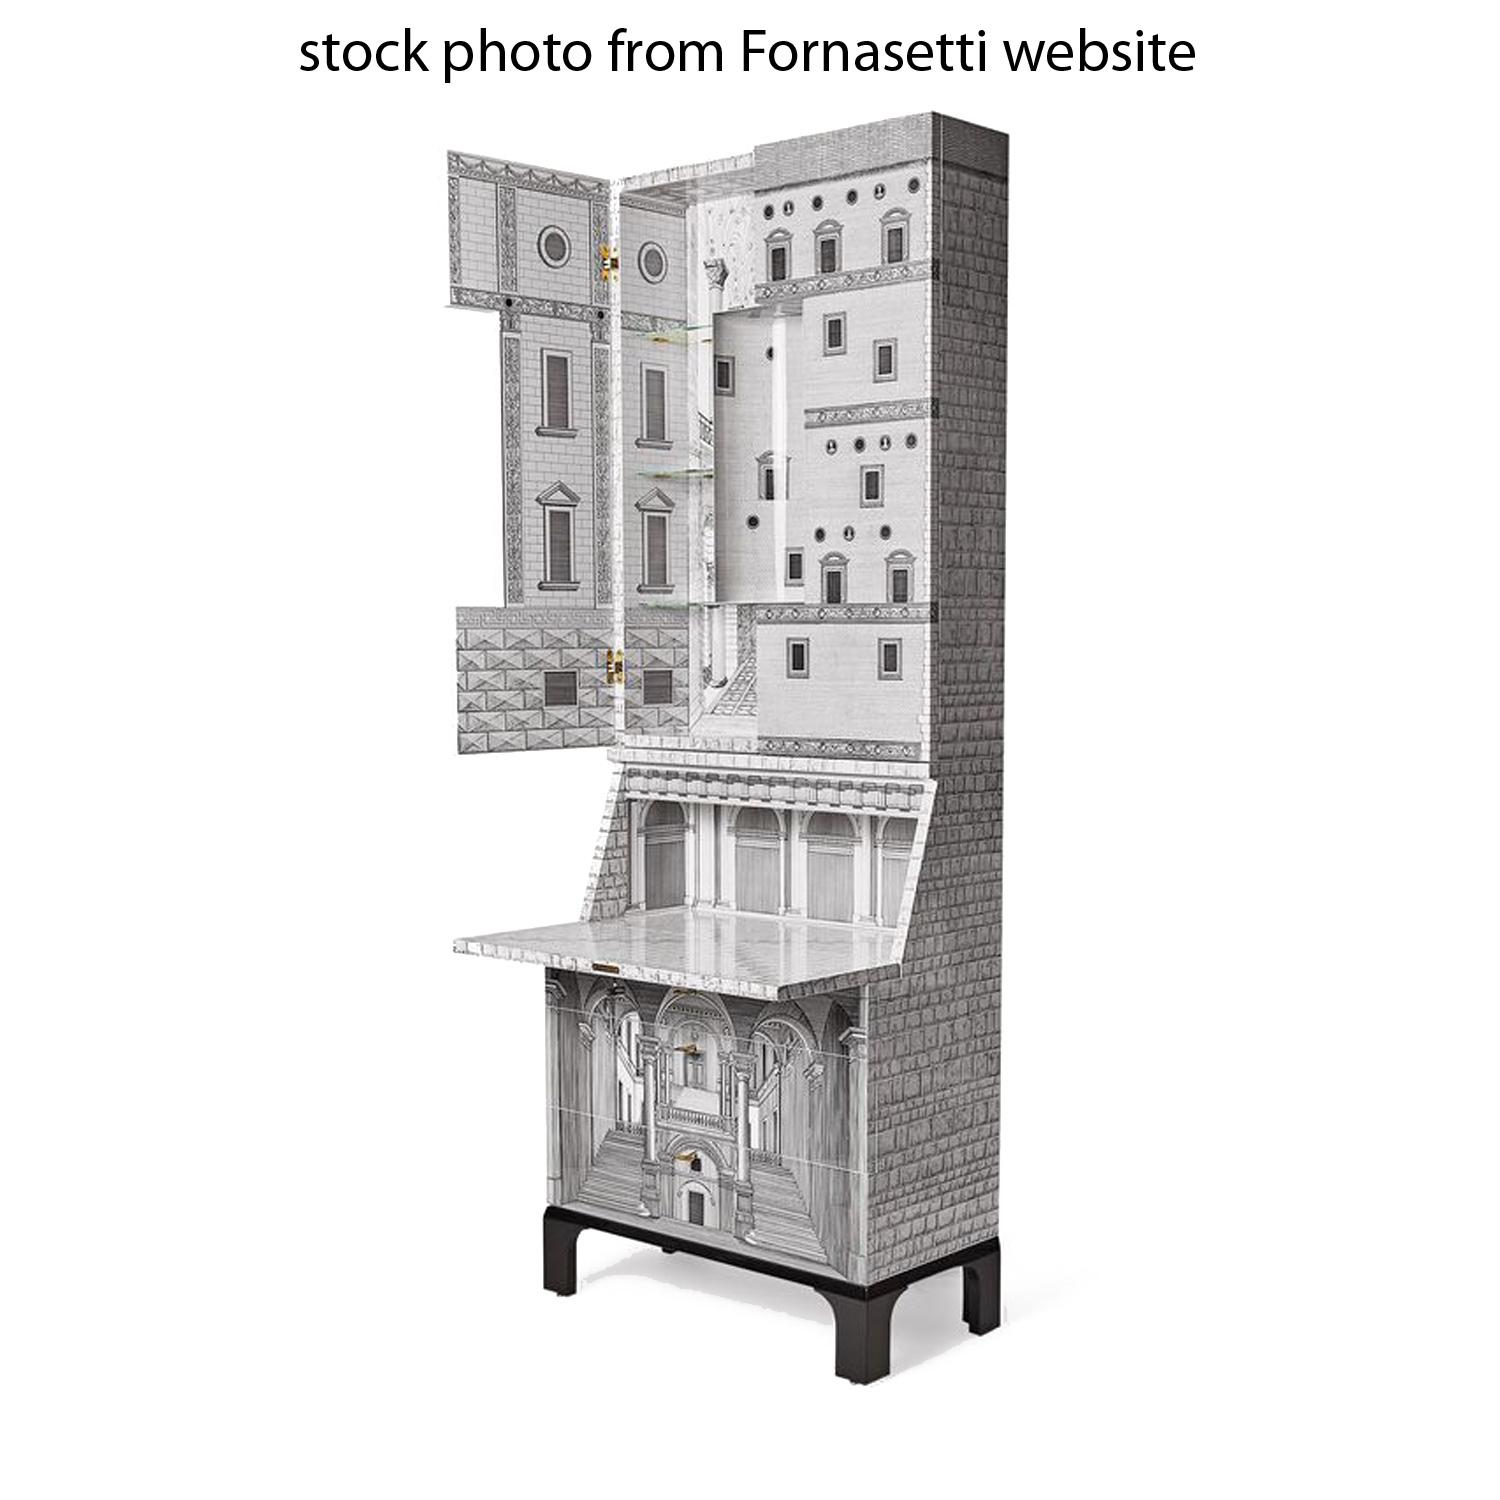 Fornasetti's Architettura Trumeau illuminated cabinet is one of the most desirable examples of Fornasetti-Ponti furniture. A stunning hybrid of a drop-front desk, bar and credenza. Three drawers, double door, and folding desk with (3) brass keys. A